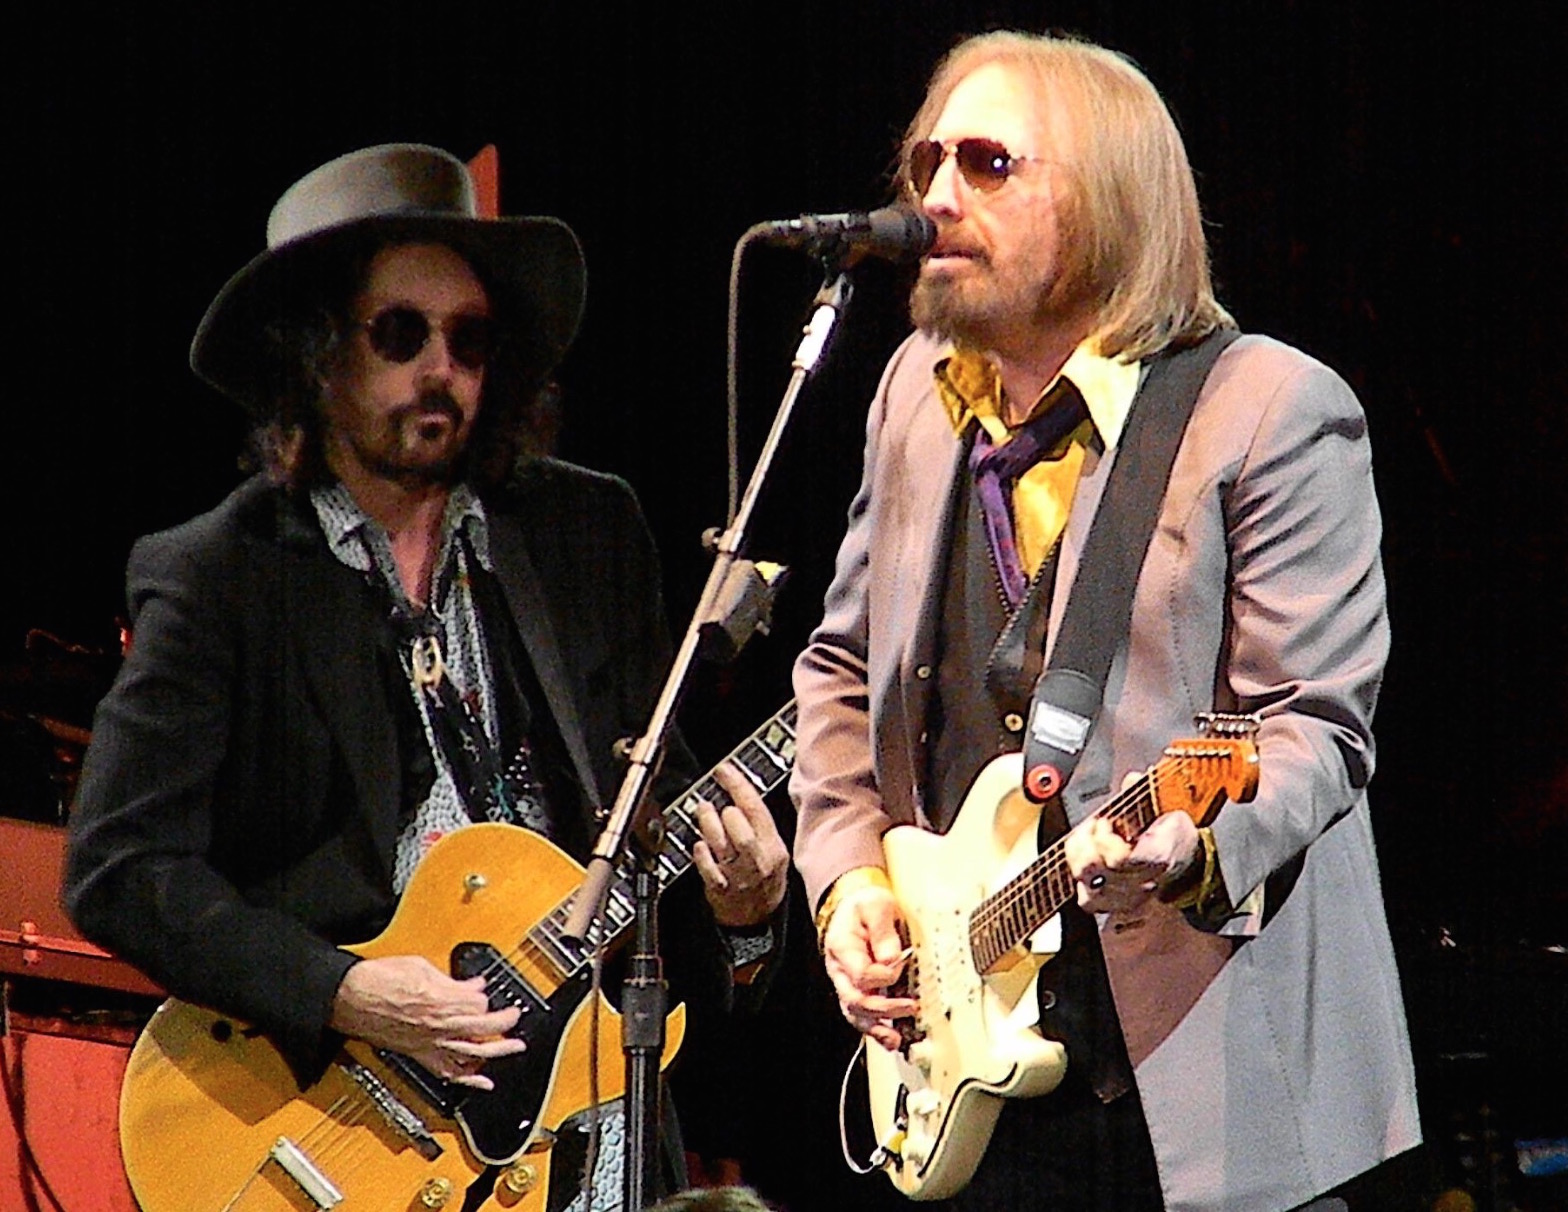 Tom Petty and Mike Campbell perform at Arroyo Seco fest - Photo by Alyson Camus